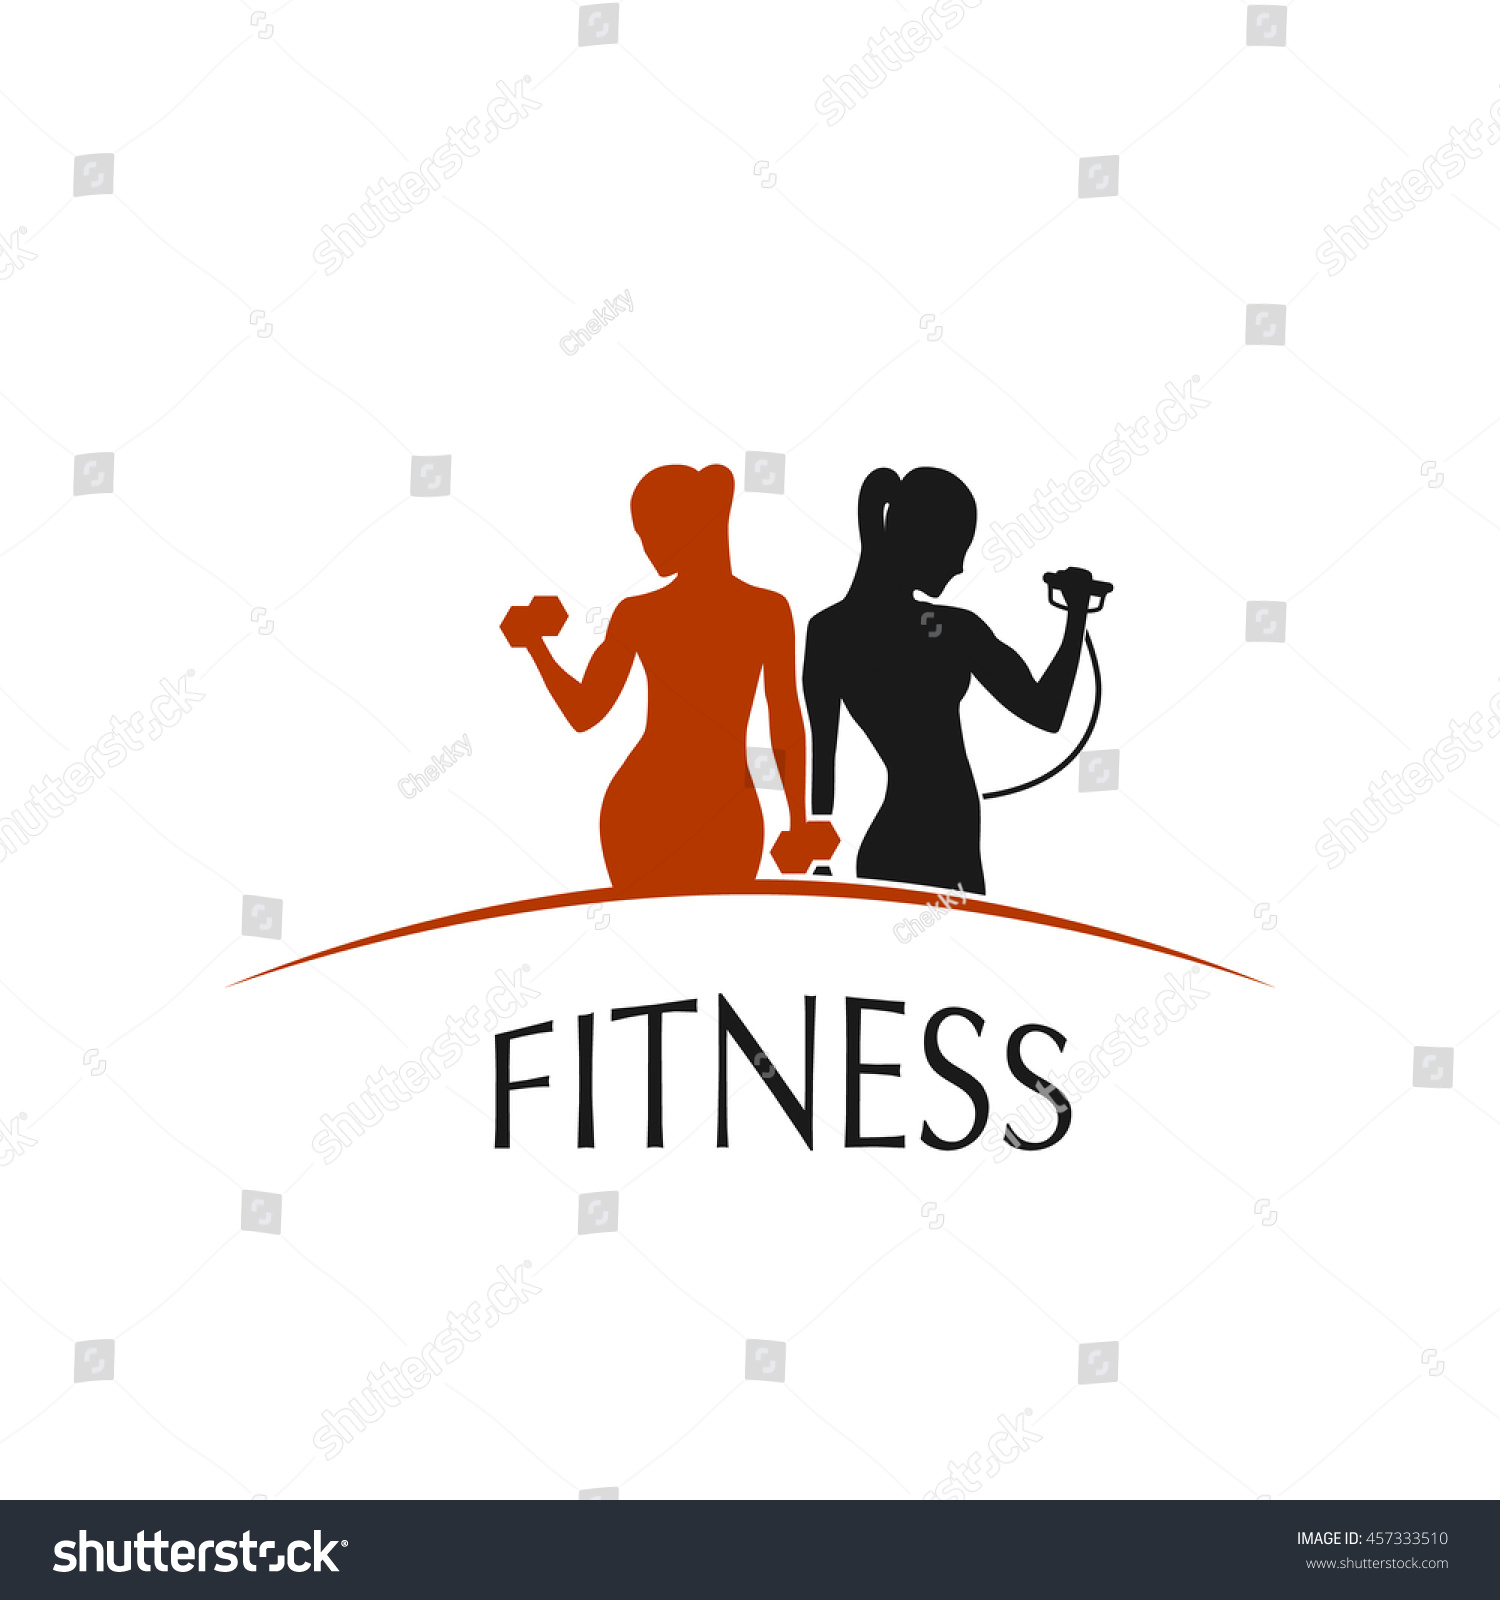 Fitness Club Logo Depicting Women Gym Stock Vector Royalty Free